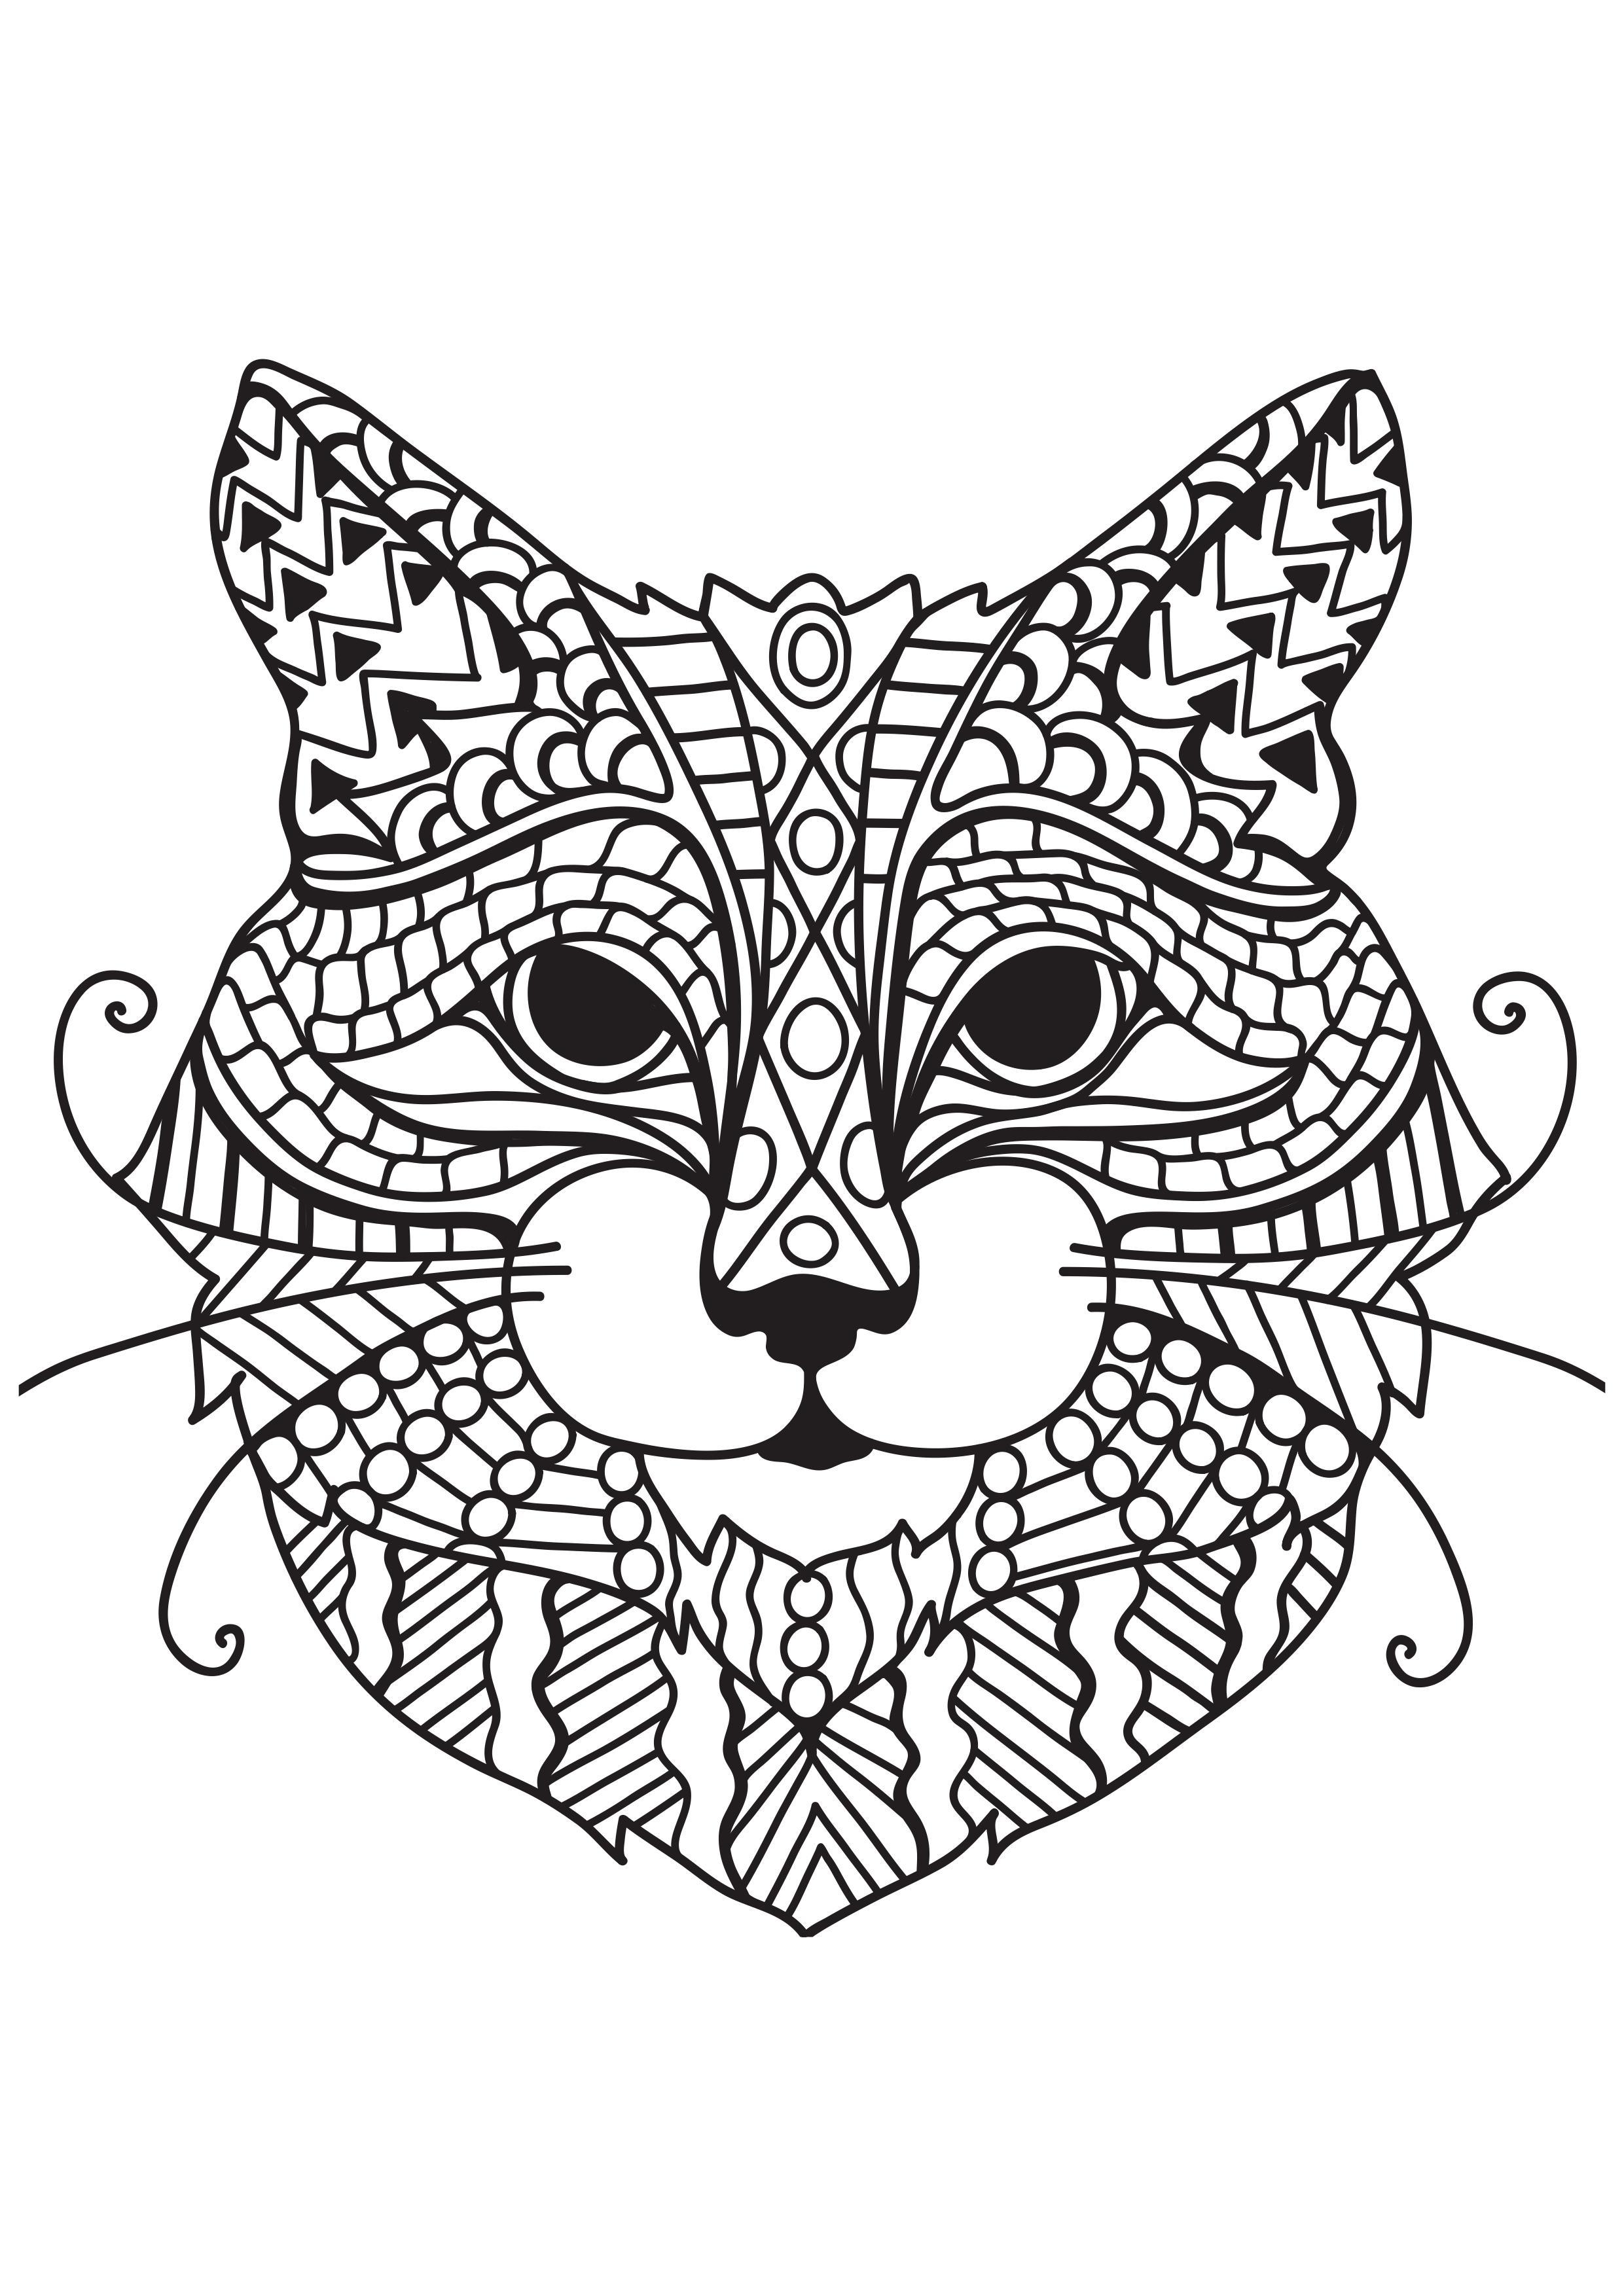 Coloring page cat with whiskers